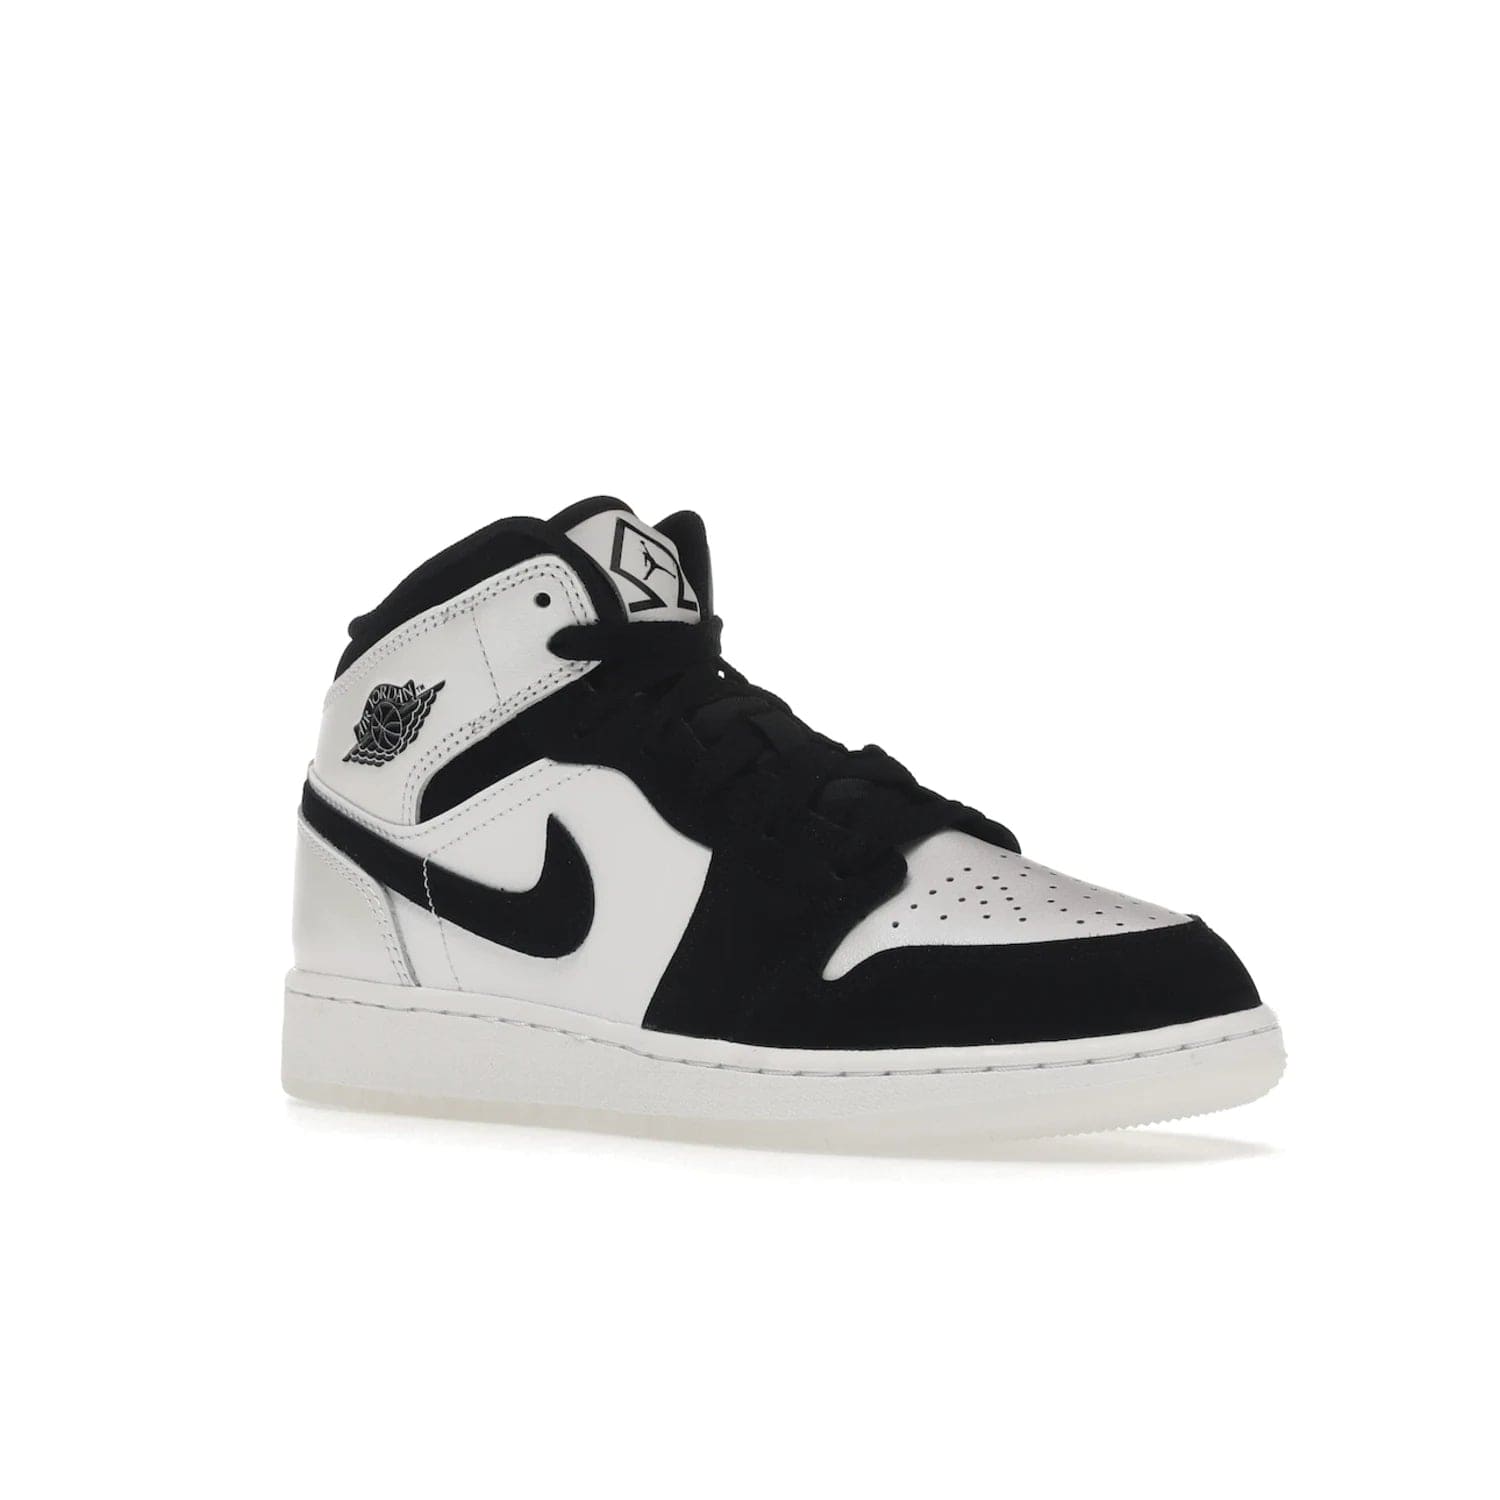 Jordan 1 Mid Diamond Shorts (GS) - Image 5 - Only at www.BallersClubKickz.com - Get the Jordan 1 Mid Diamond Shorts GS on 9th Feb 2022! Features a white, black & suede design with nylon tongue, stamped wings logo, rubber midsole & outsole. Only $100!